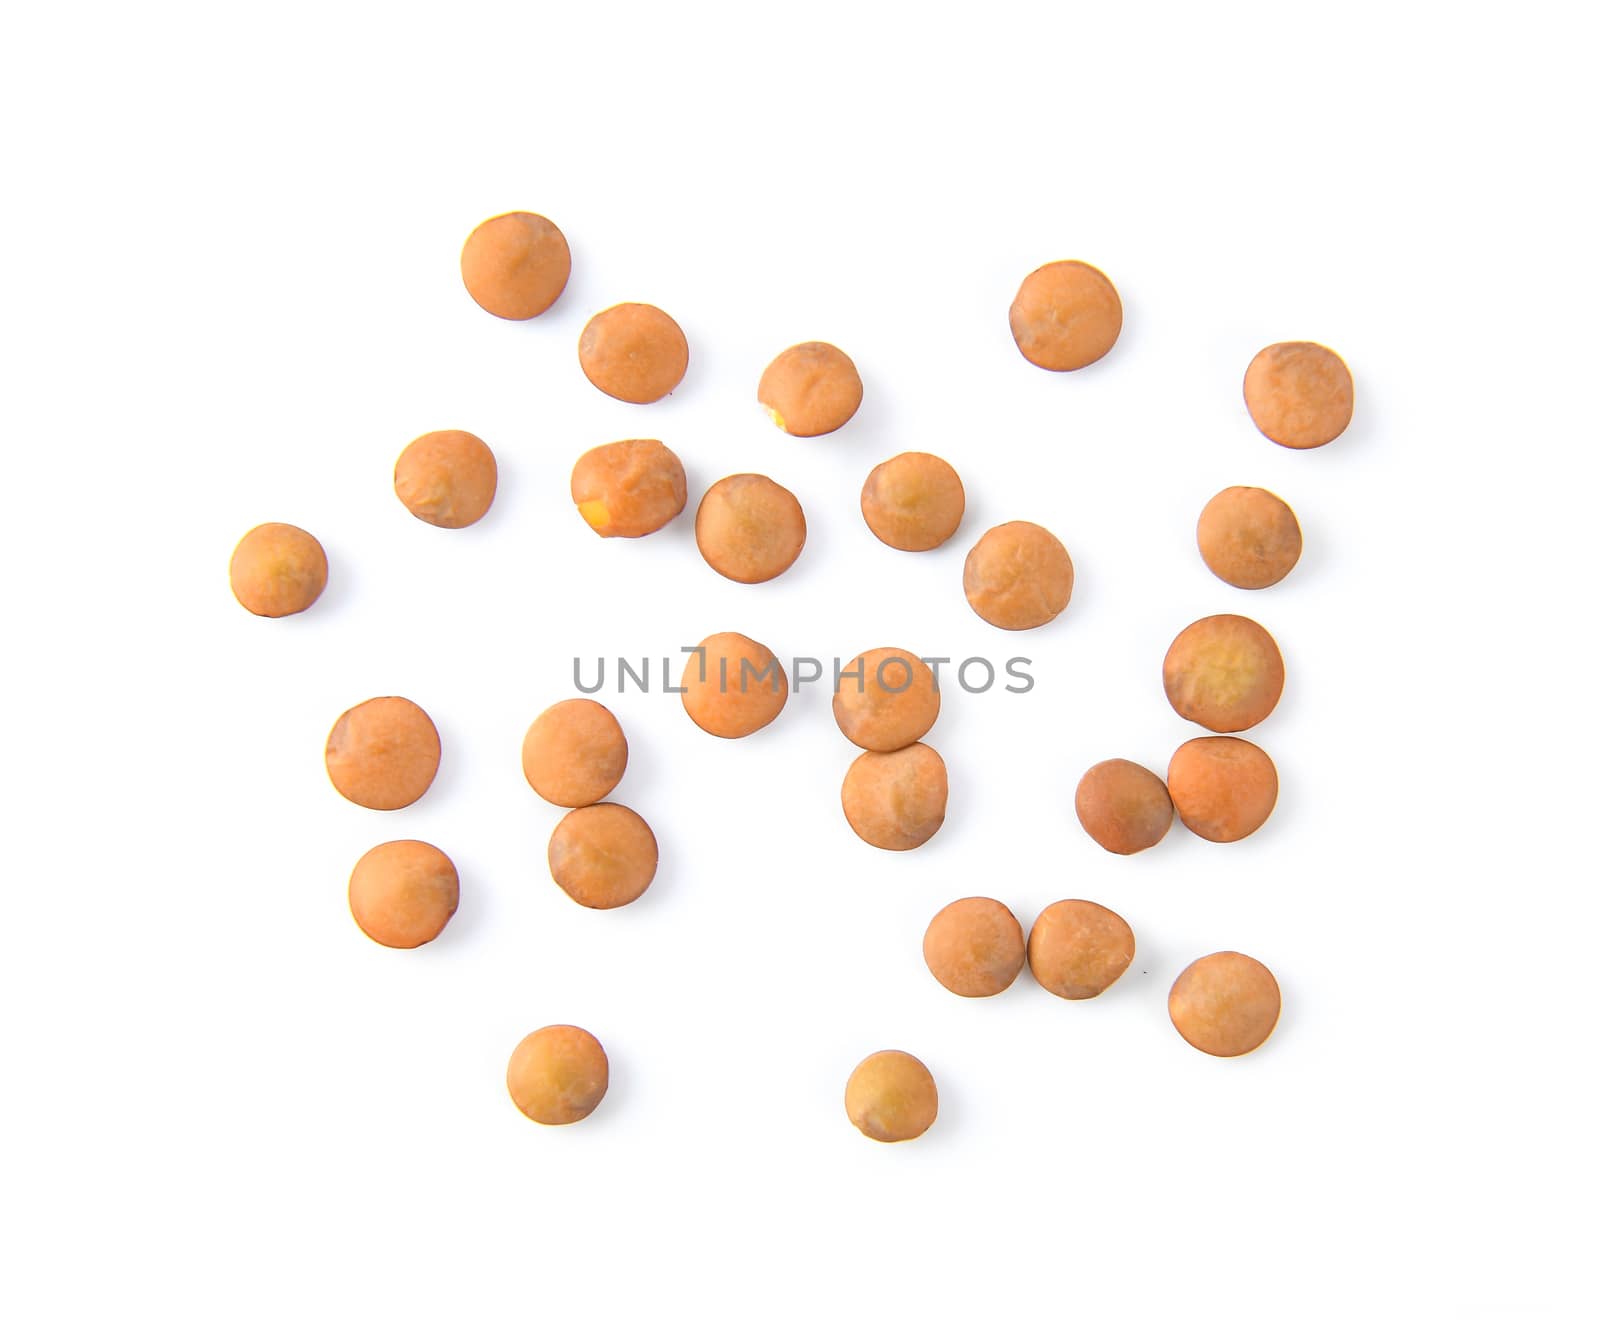 Brown Lentils isolated on white background